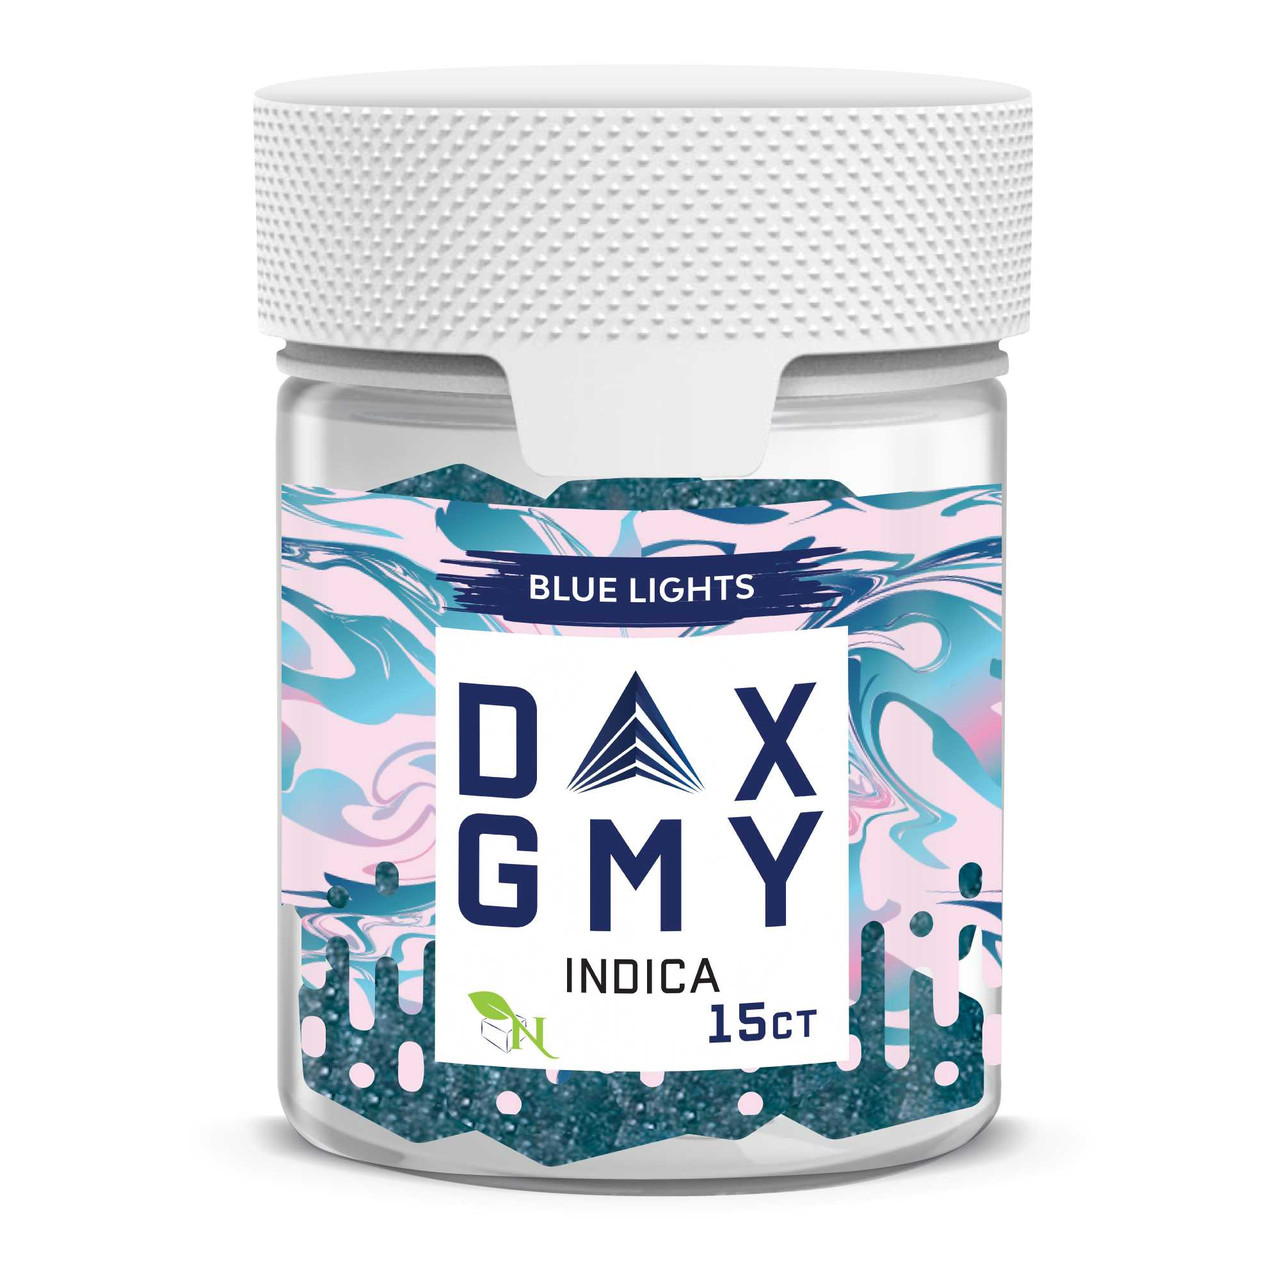 DELTA 10 By Agift From Nature CBD-The Ultimate Review of the Top DELTA 10 Products